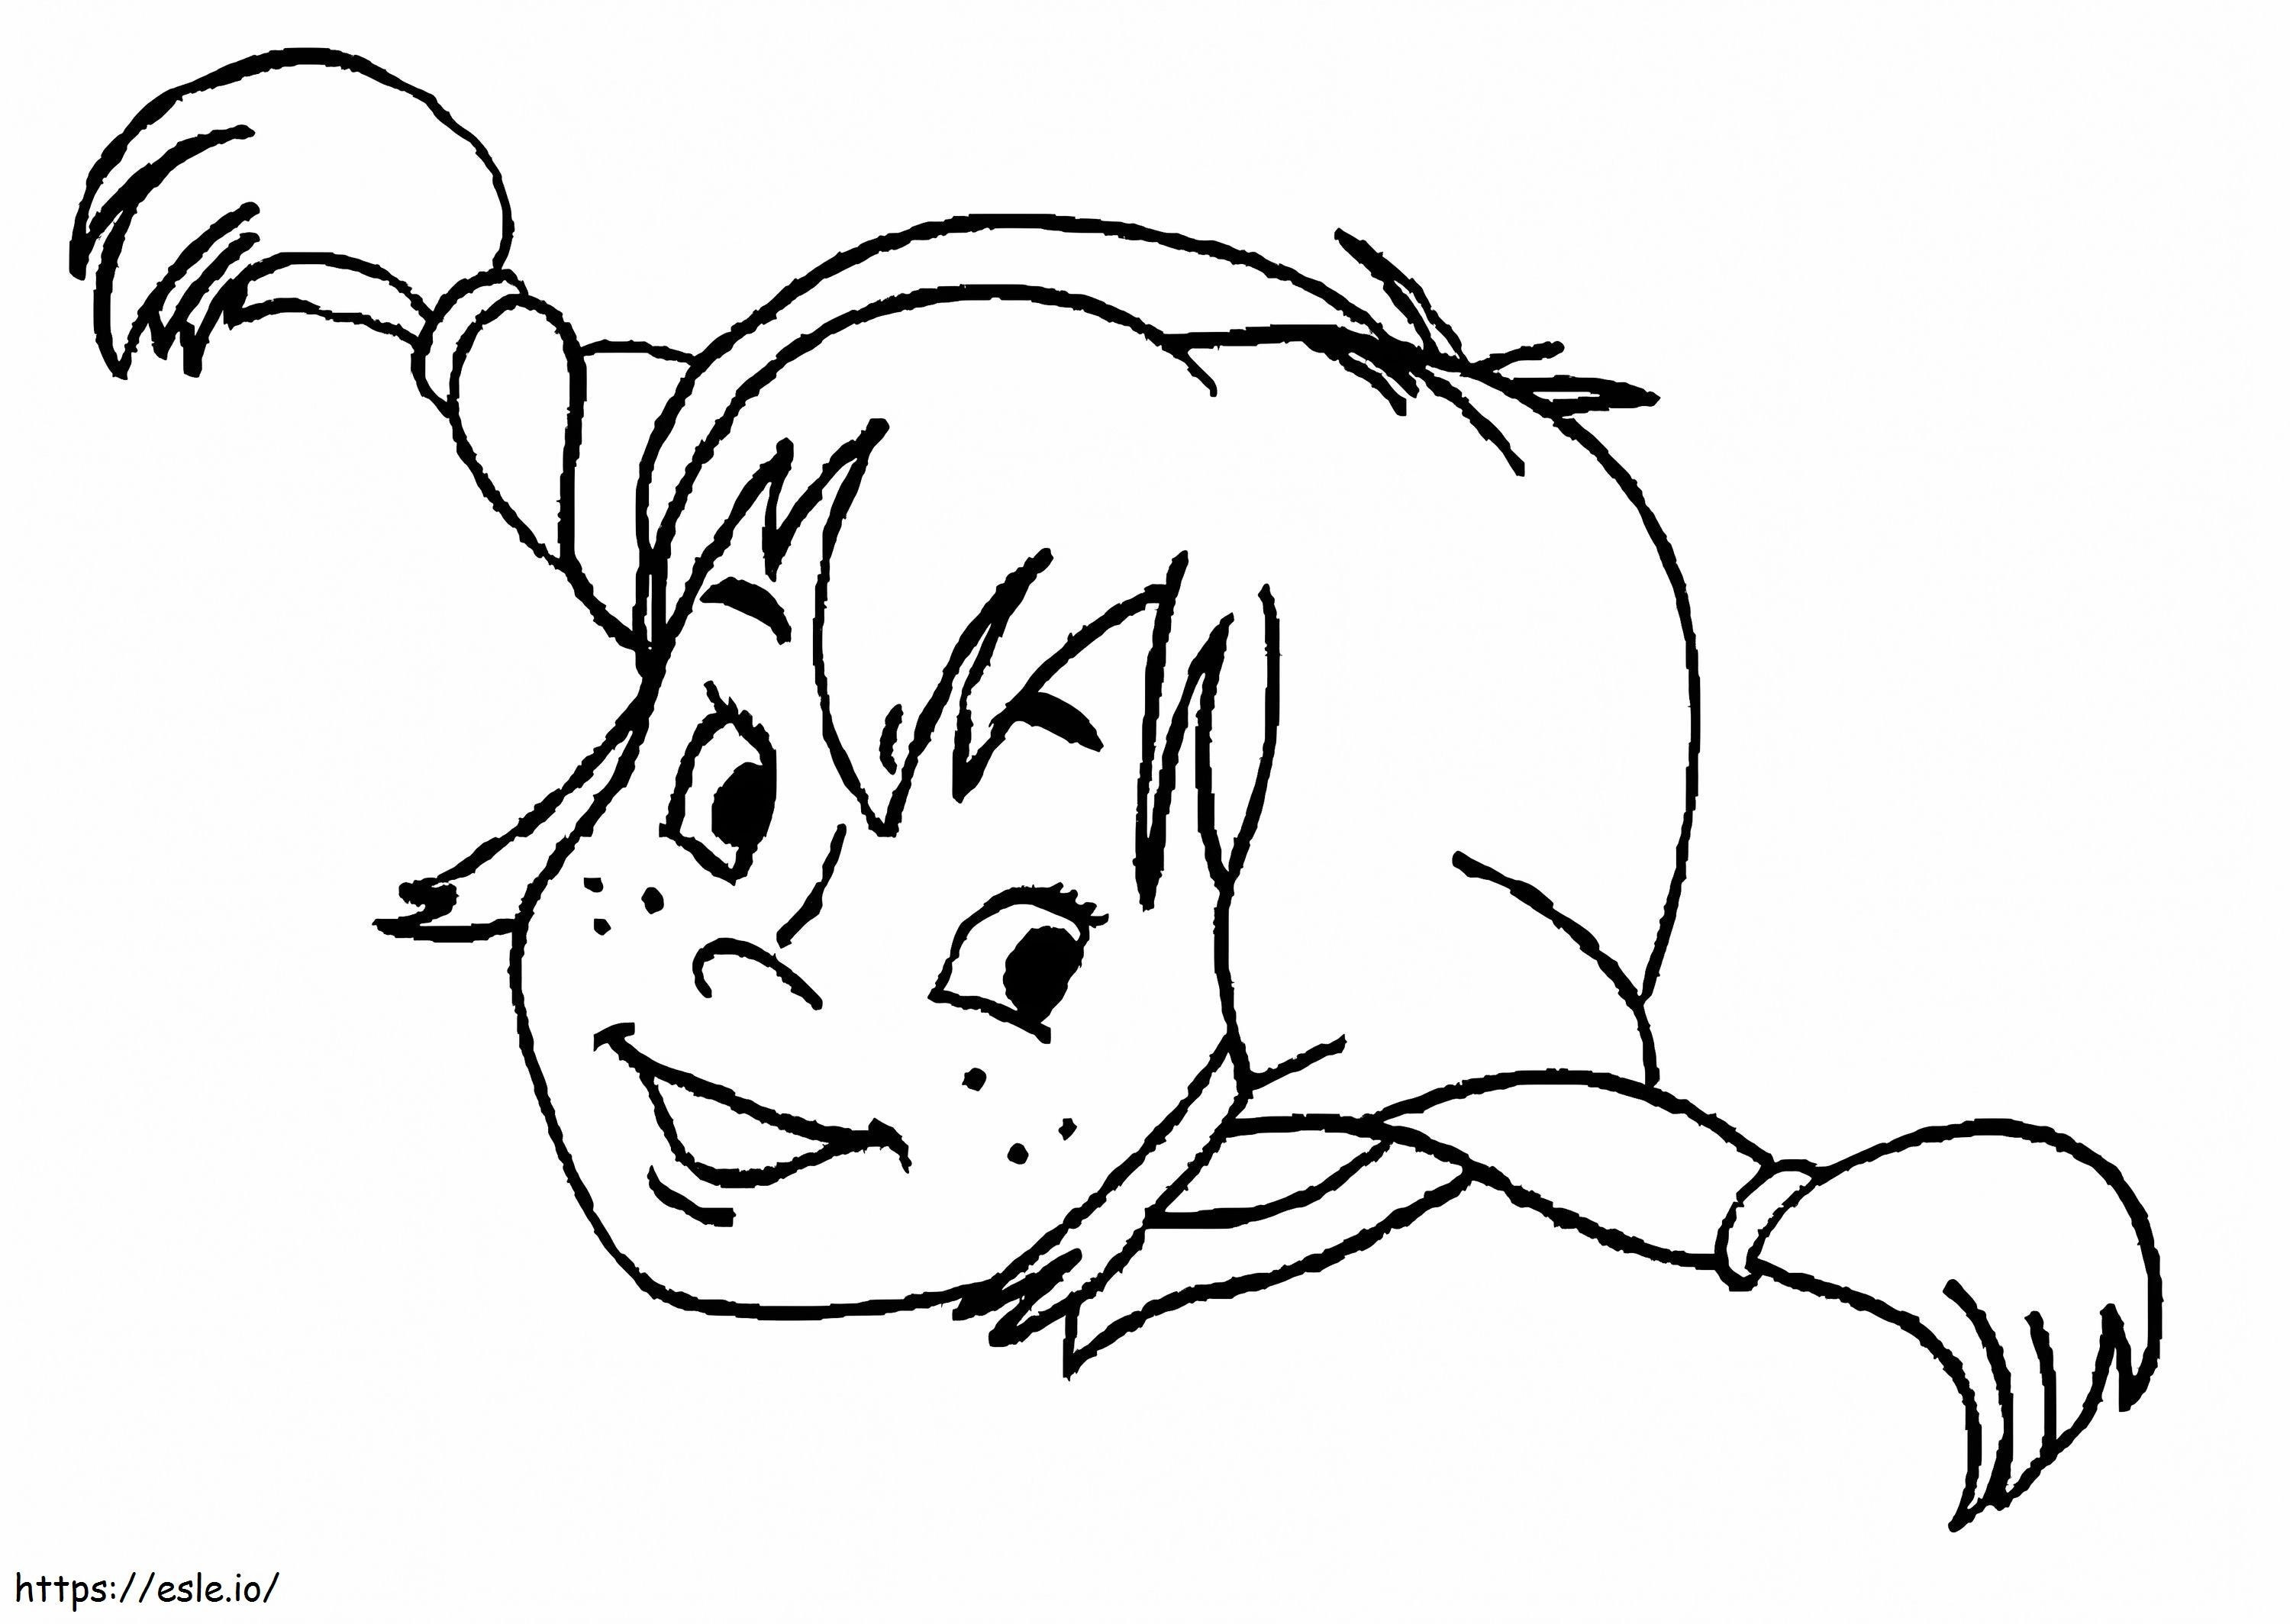 Cute Pippi Longstocking coloring page